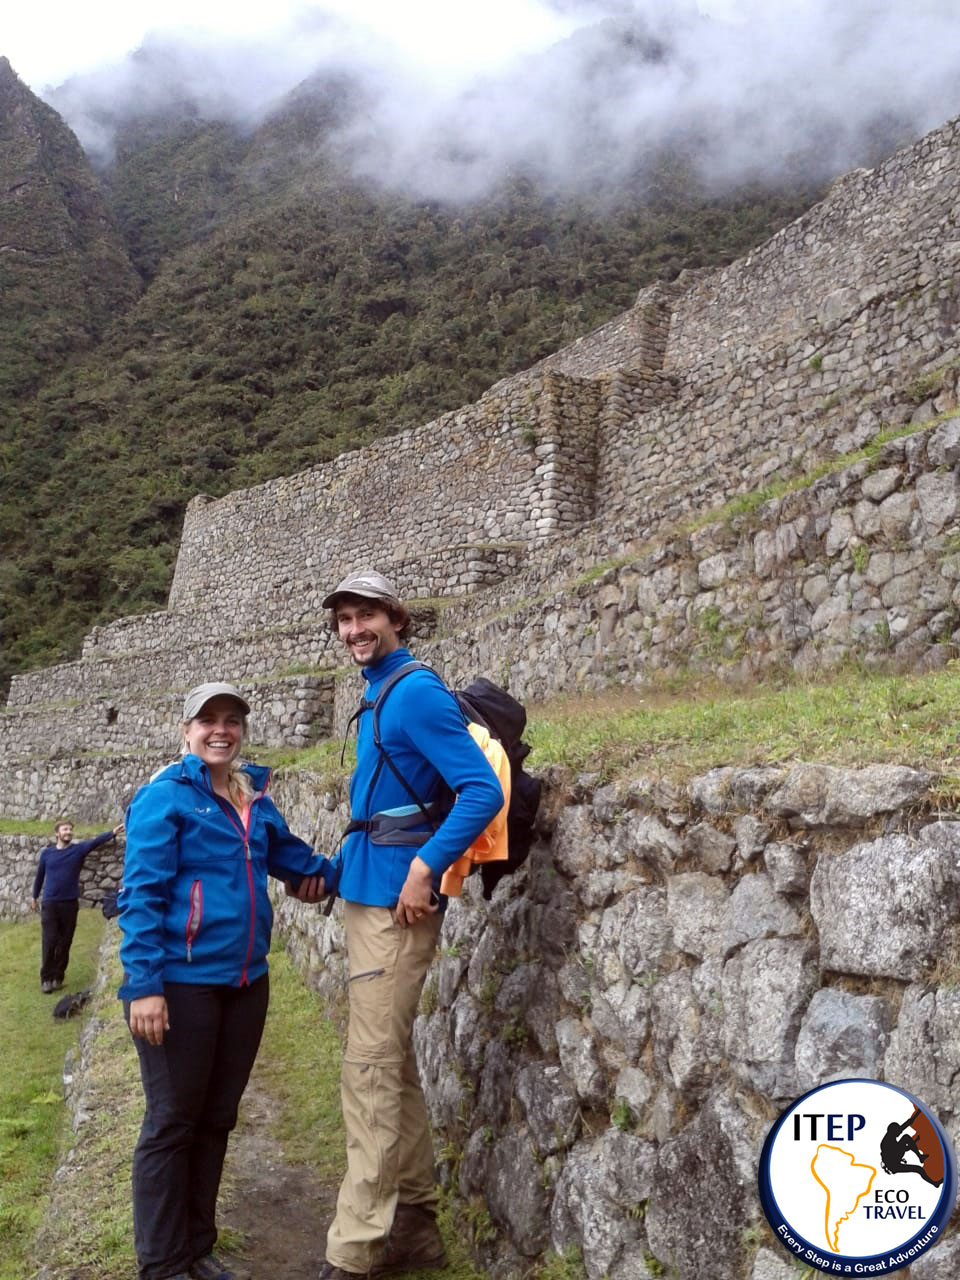 Short Inca Trail 2 days leaving on August 24th 2018 - Short Inca Trail 2 days leaving on August 24th 2018